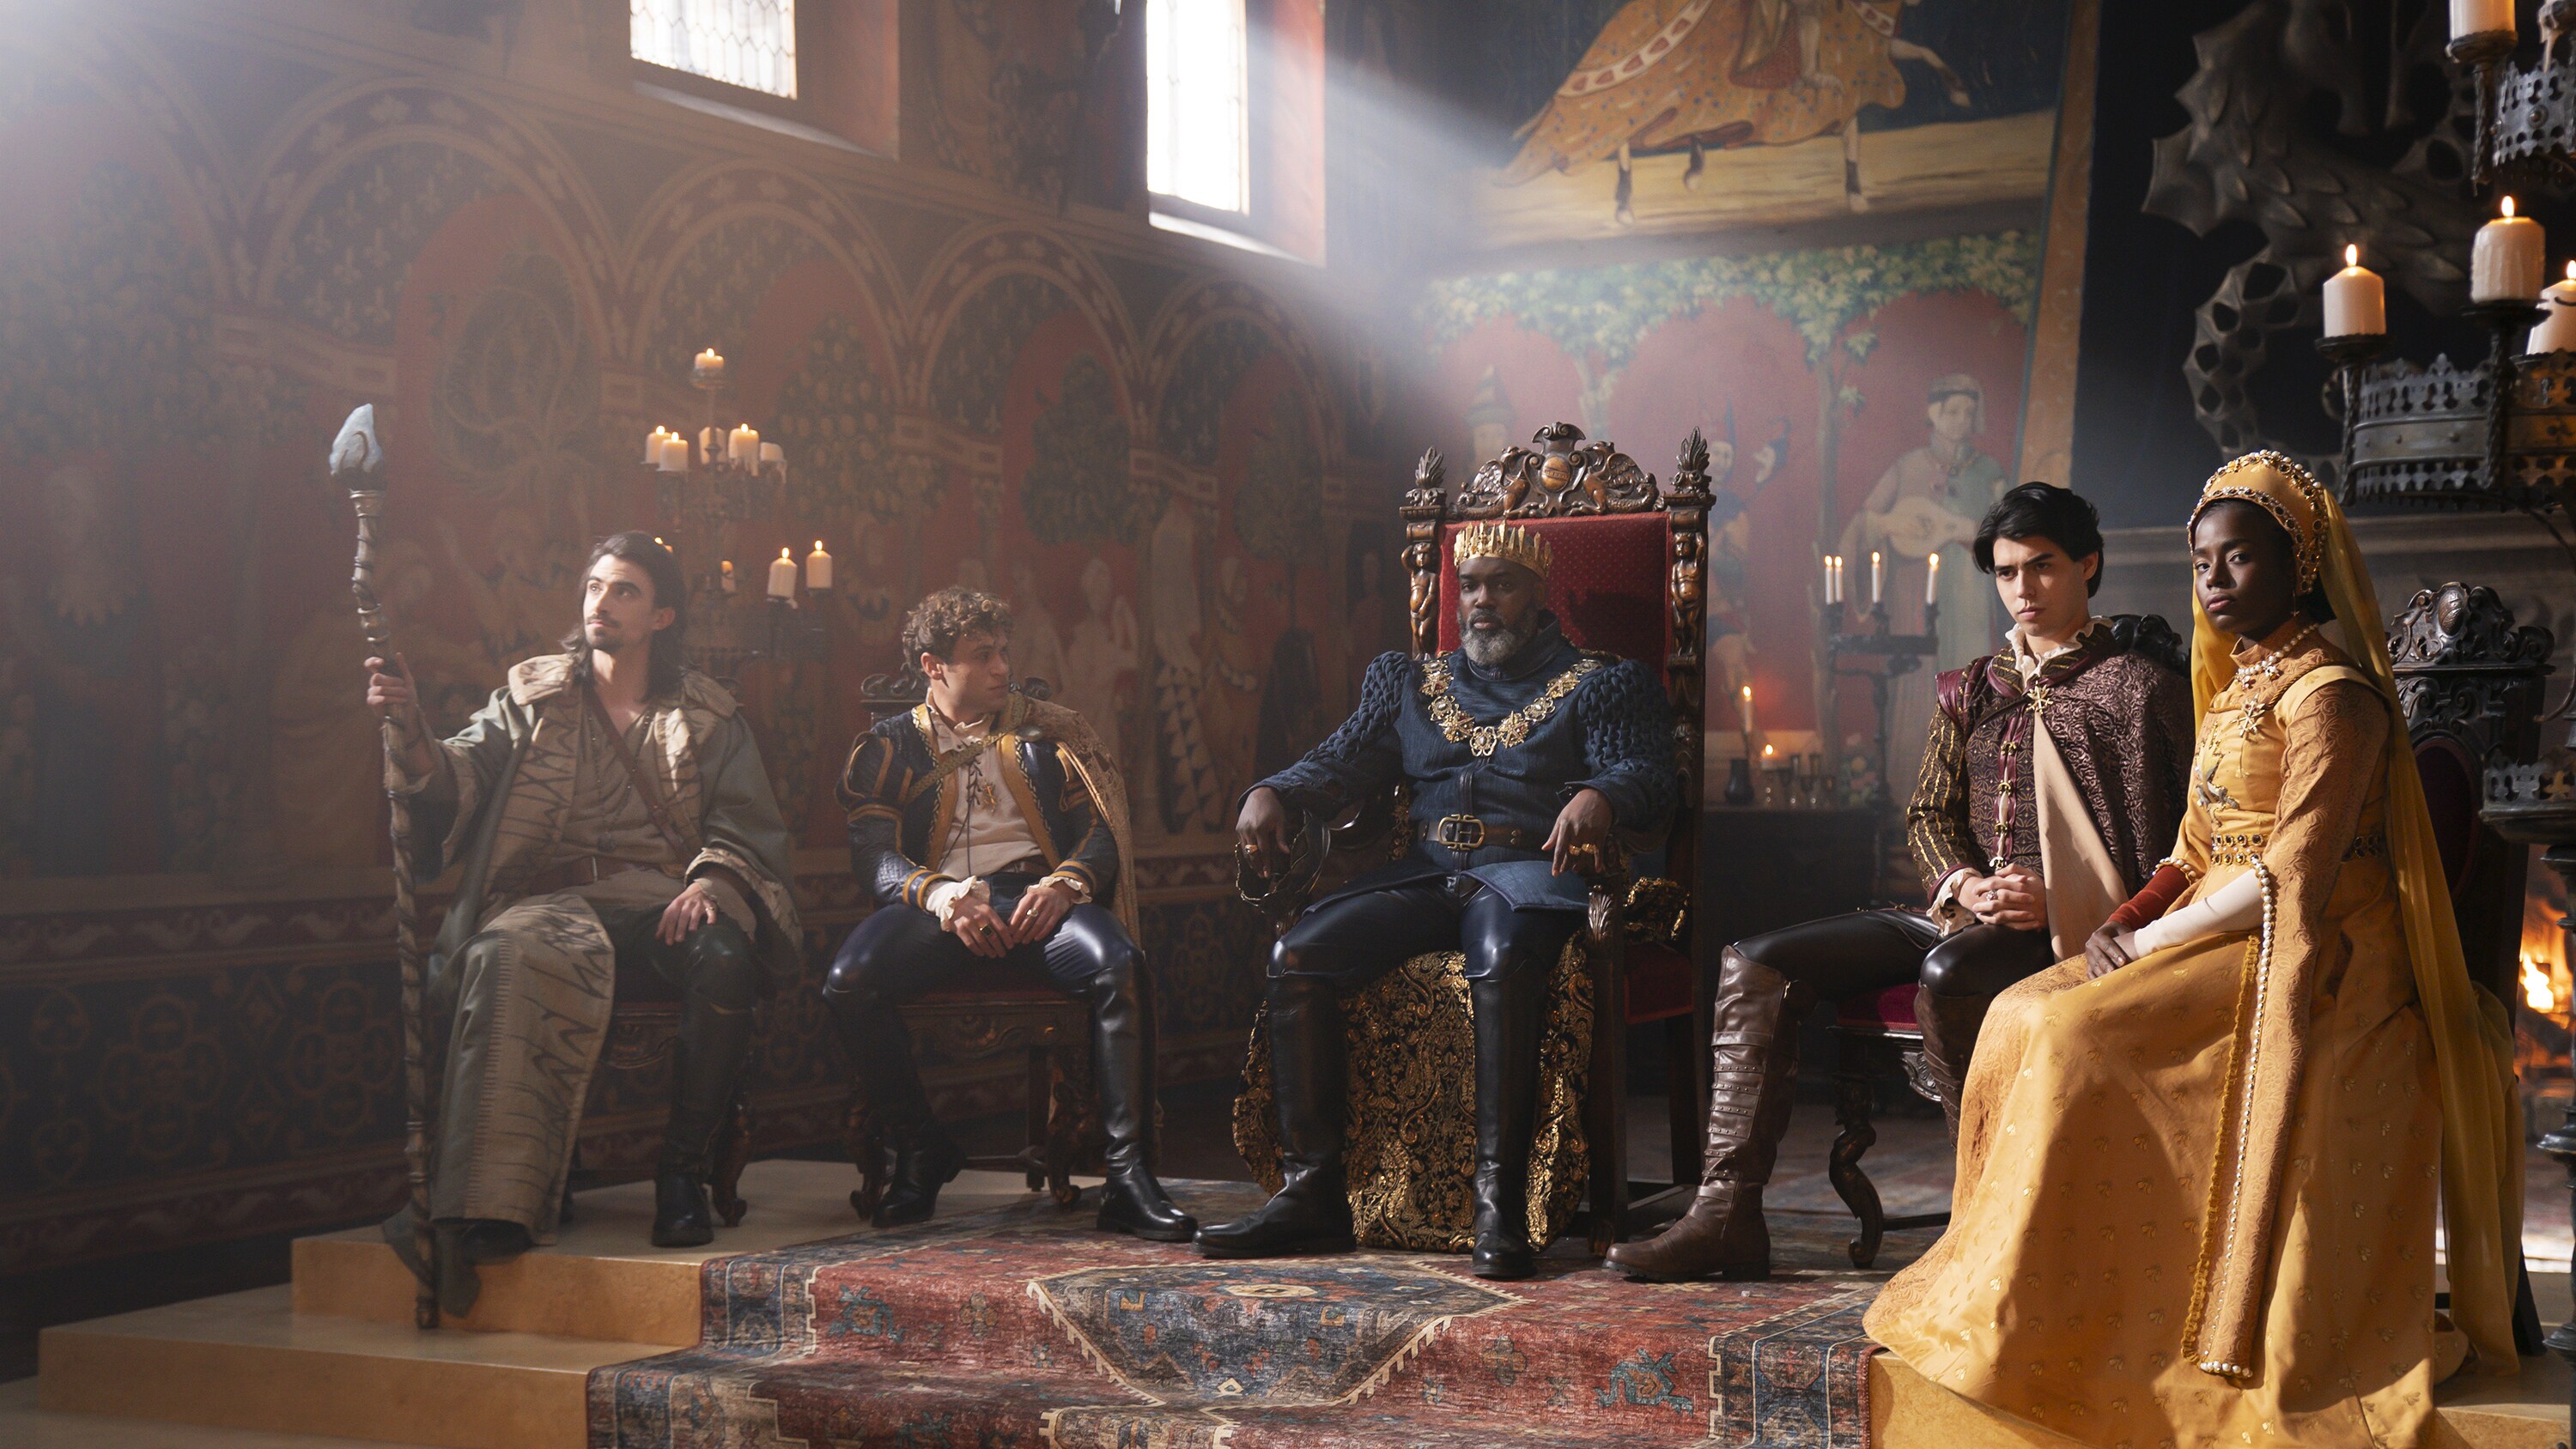 THE QUEST - Dravus, Prince Cedric, King Silas, Prince Emmett, and Princess Adaline await to hear from the heroes summoned by the fates. (Disney/Allyson Riggs)